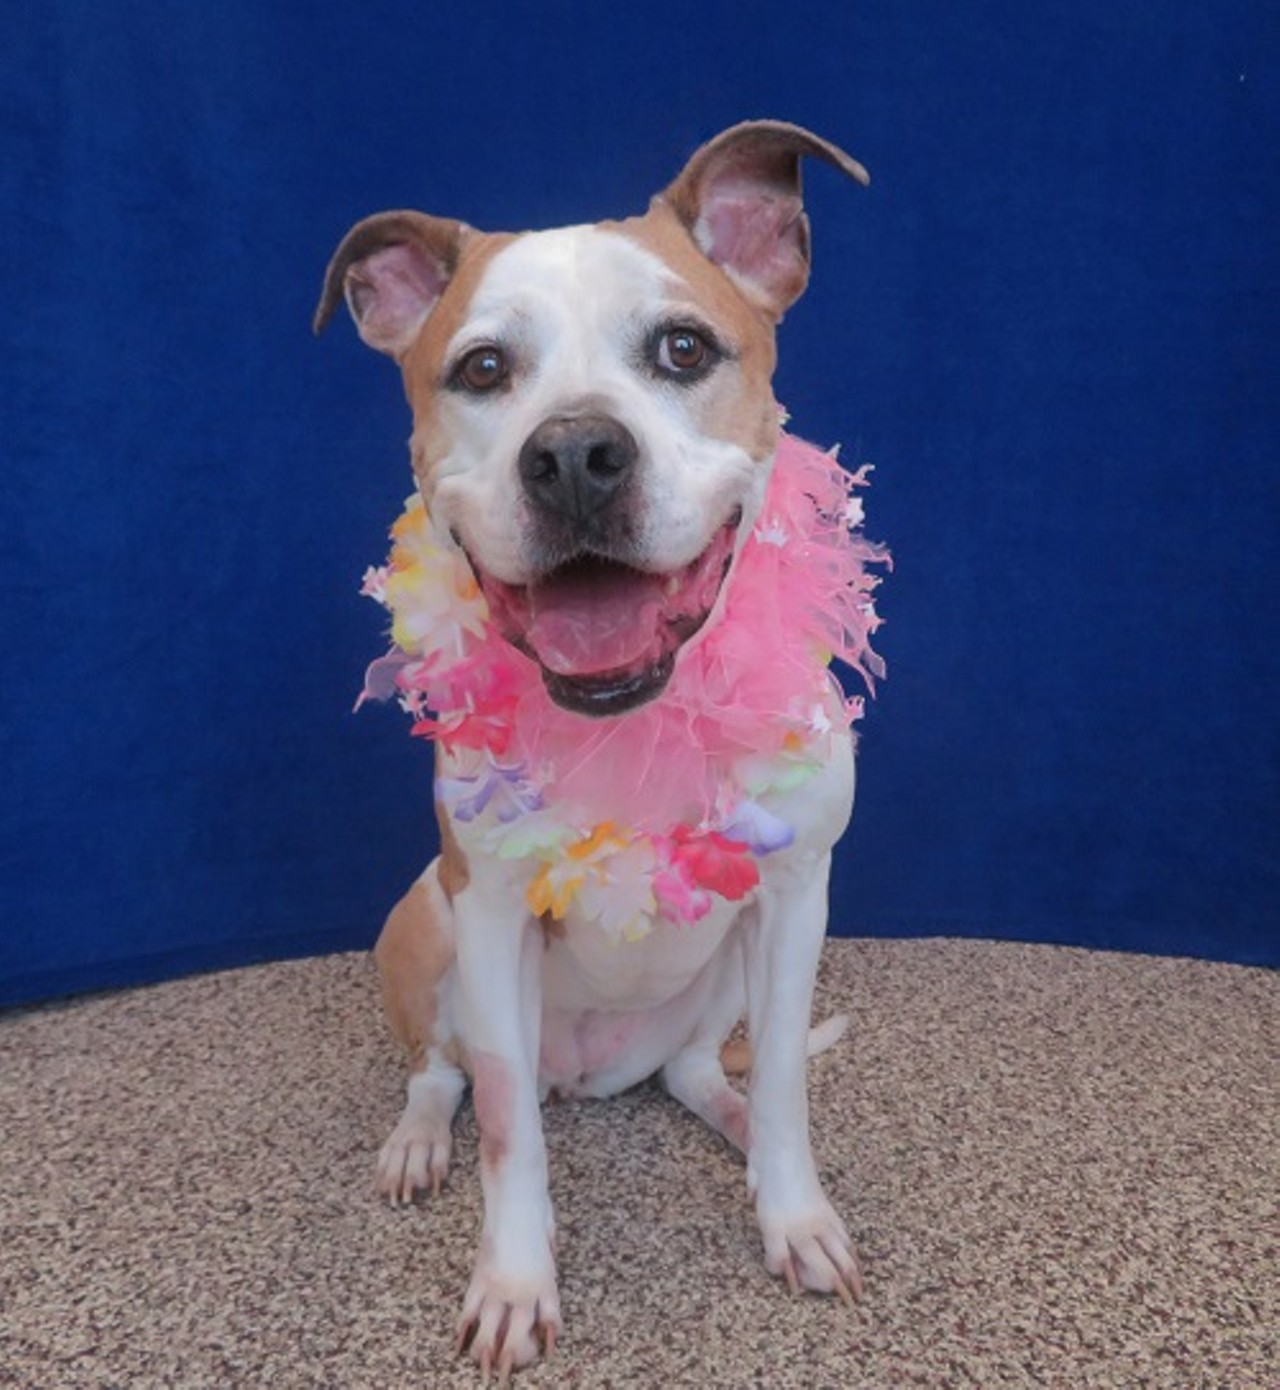 NAME: Roxy
GENDER: Female
BREED: American Bulldog
AGE: 10 years, 1 month
WEIGHT: 80 pounds
SPECIAL CONSIDERATIONS: Roxy prefers a home with older or no children
REASON I CAME TO MHS: Owner surrender
LOCATION: Mackey Center for Animal Care in Detroit
ID NUMBER: 868134